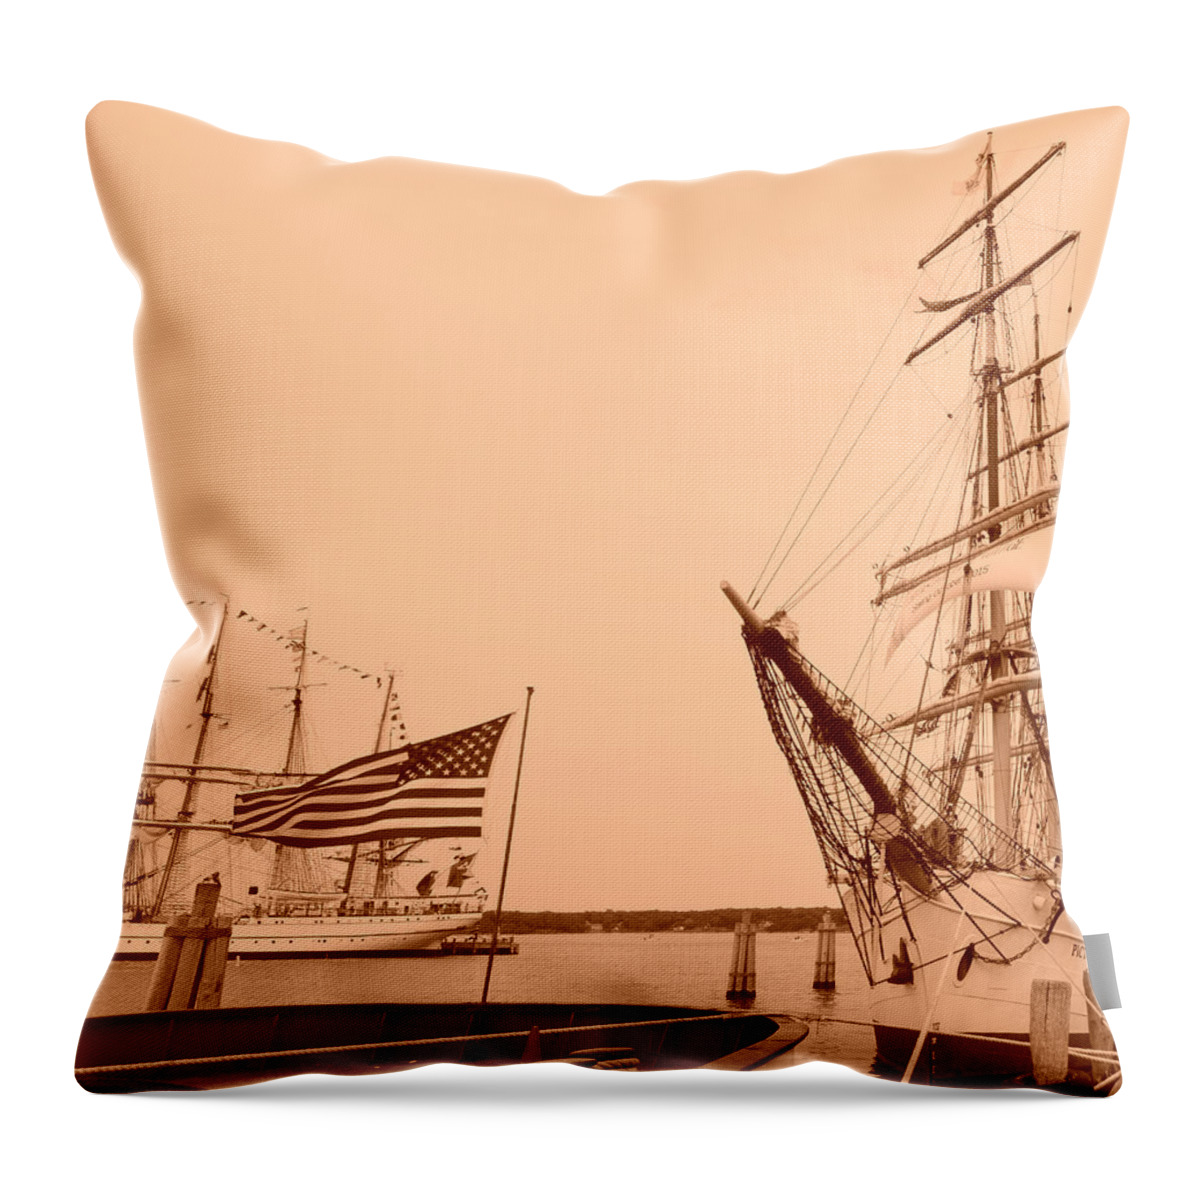 Tall Ships Throw Pillow featuring the mixed media Tall Ships Sepia Tone by Stacie Siemsen